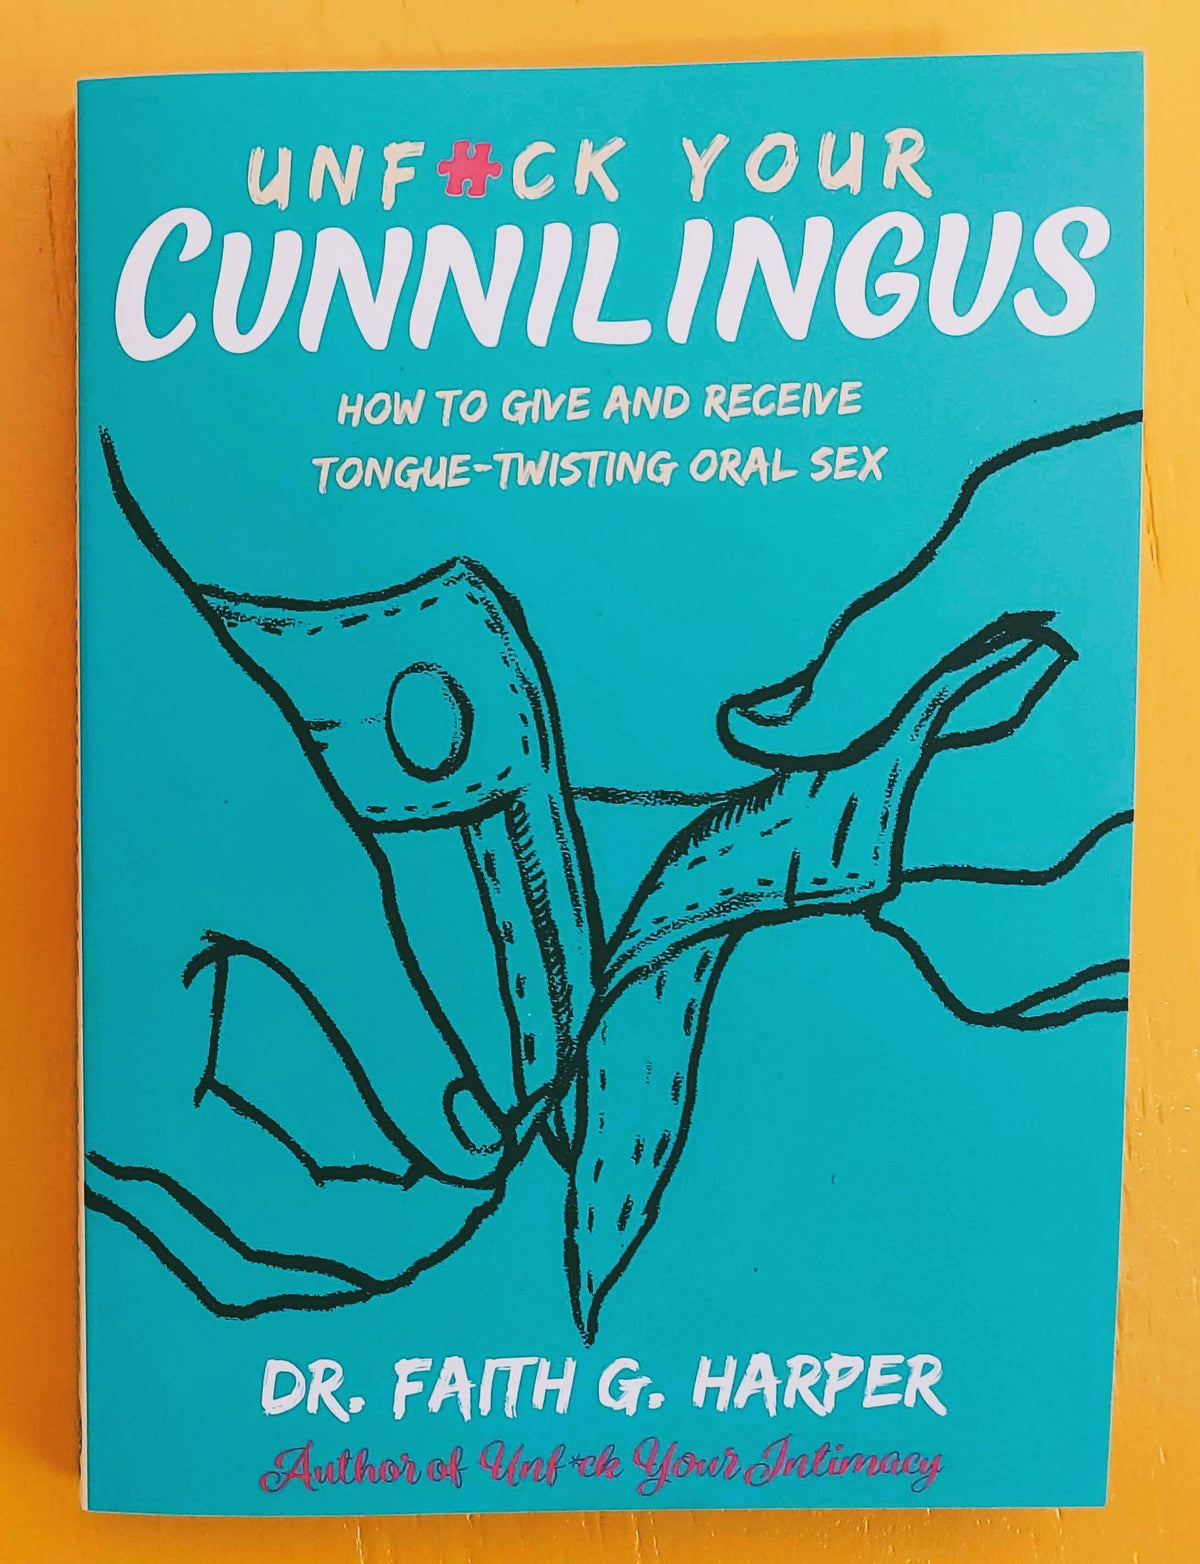 Unfuck Your Cunnilingus: Give & Receive Tongue-Twisting Oral